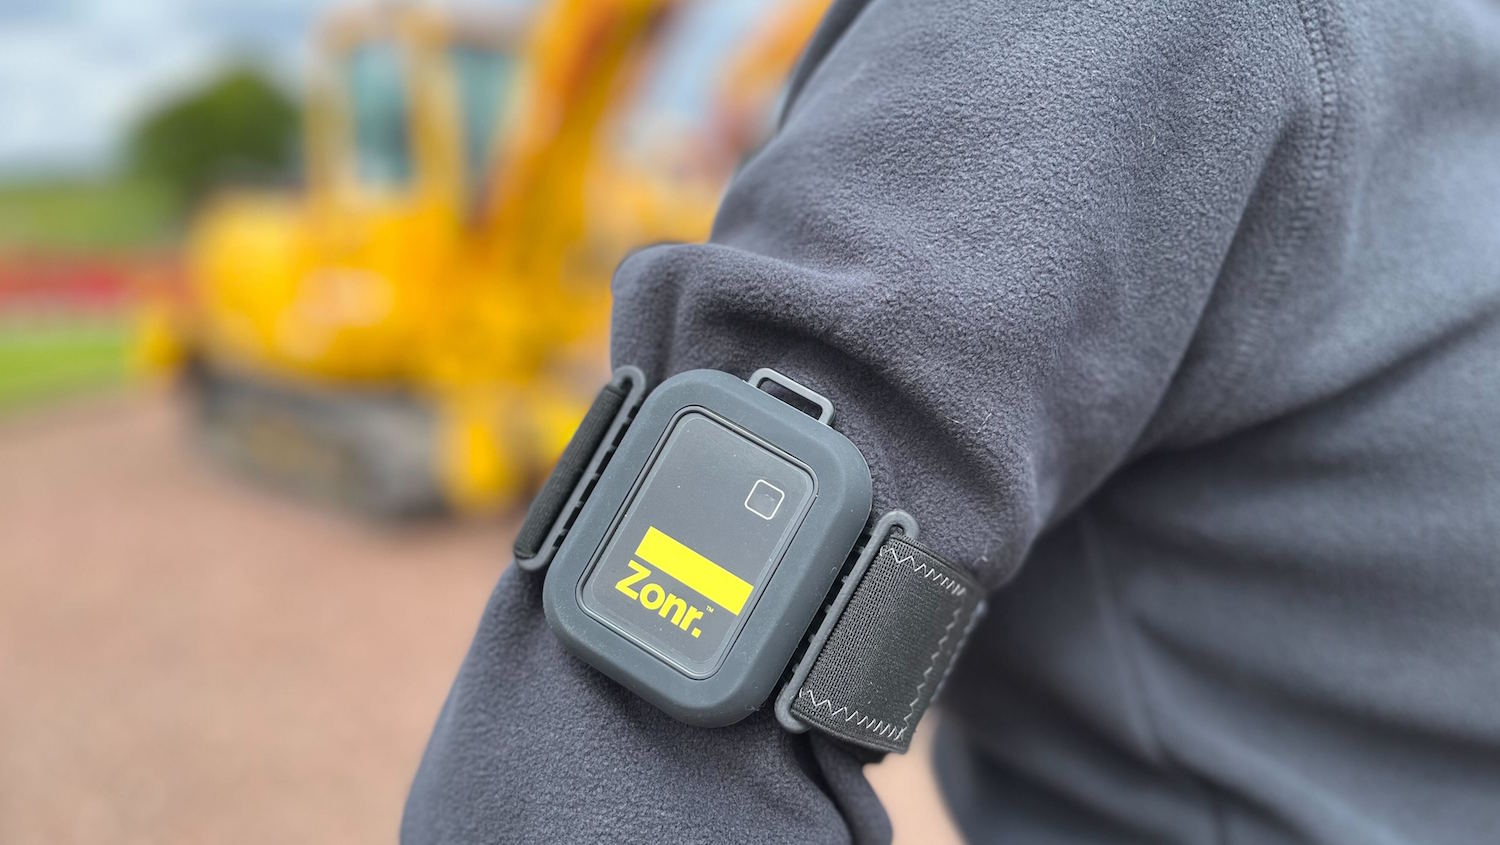 The Zonr sensor being worn on a site worker's sleeve